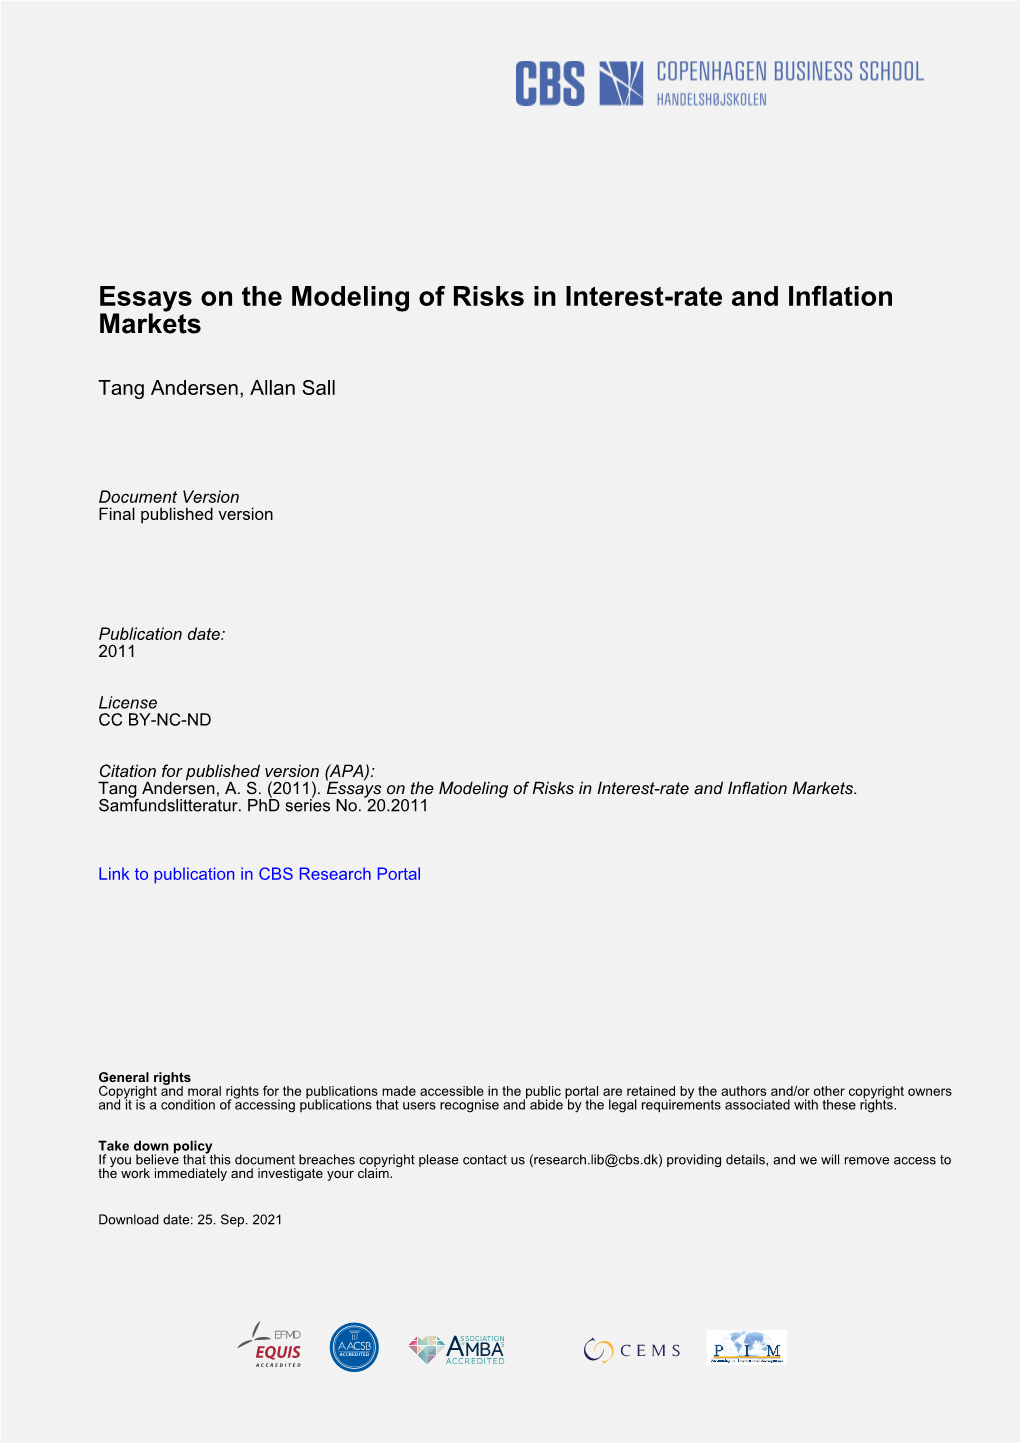 Essays on the Modeling of Risks in Interest-Rate and Inflation Markets